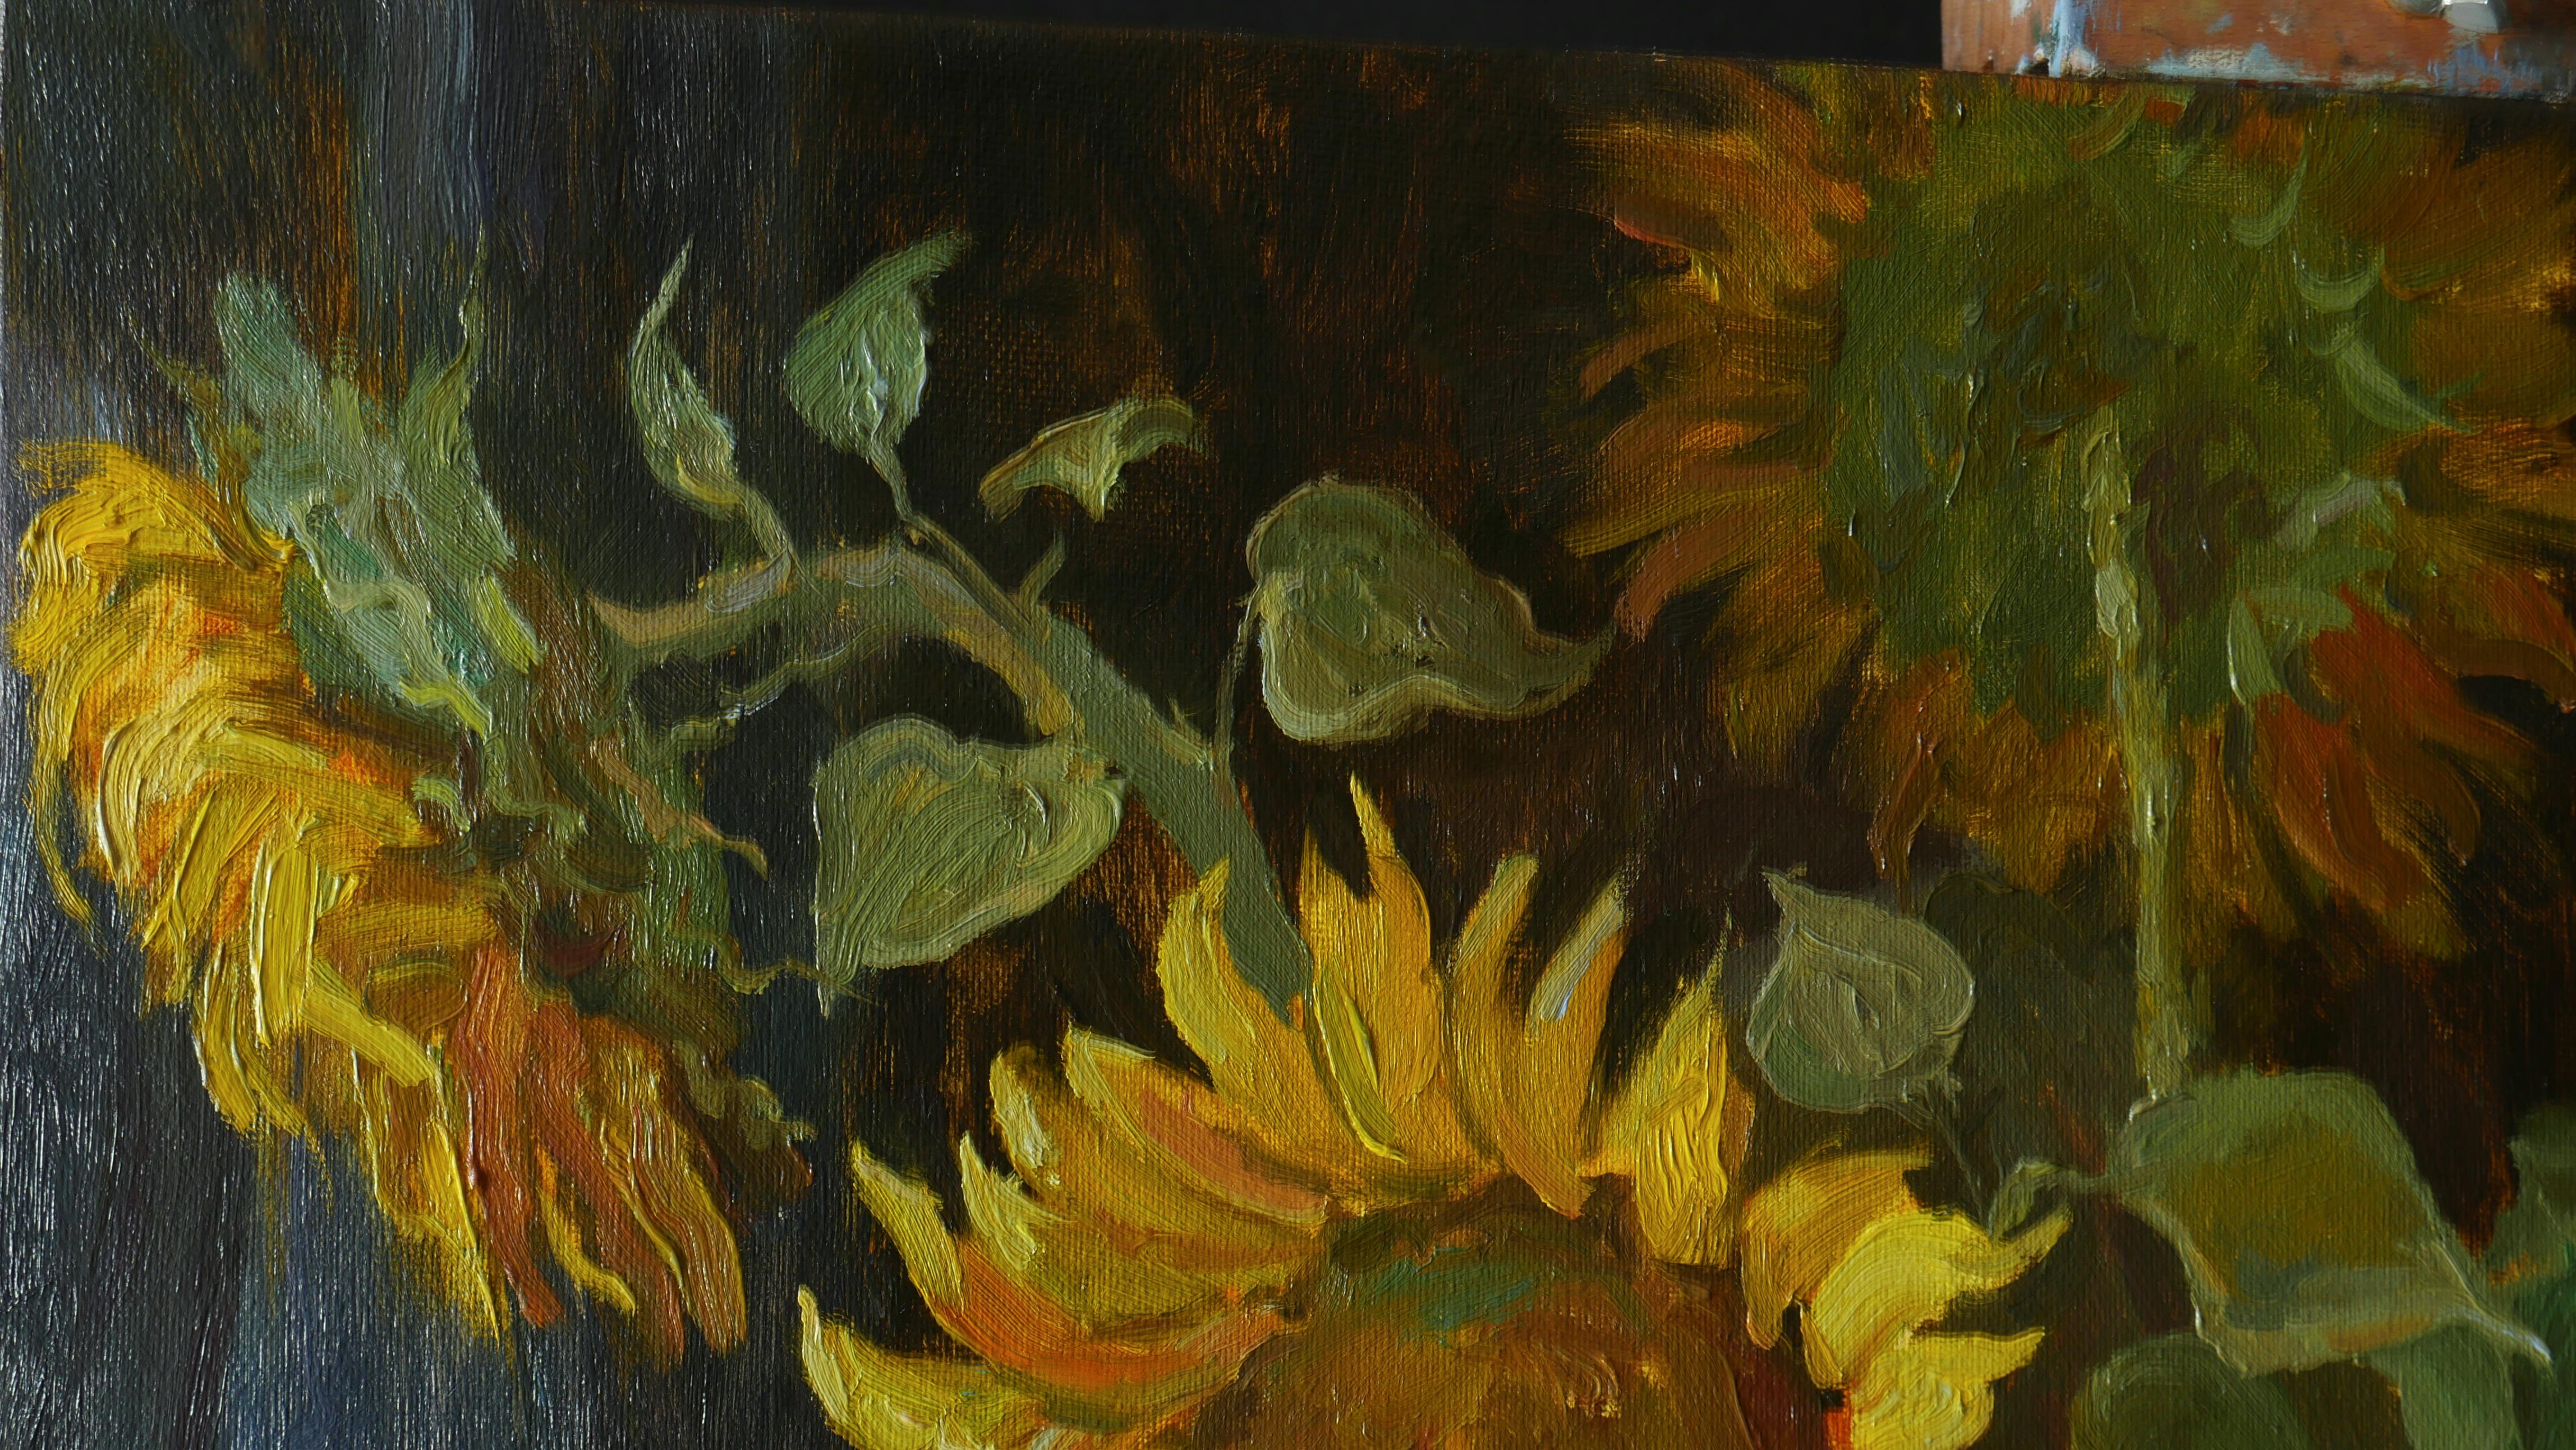 Sunflowers Near The Blue Curtain - sunflowers still life painting For Sale 2